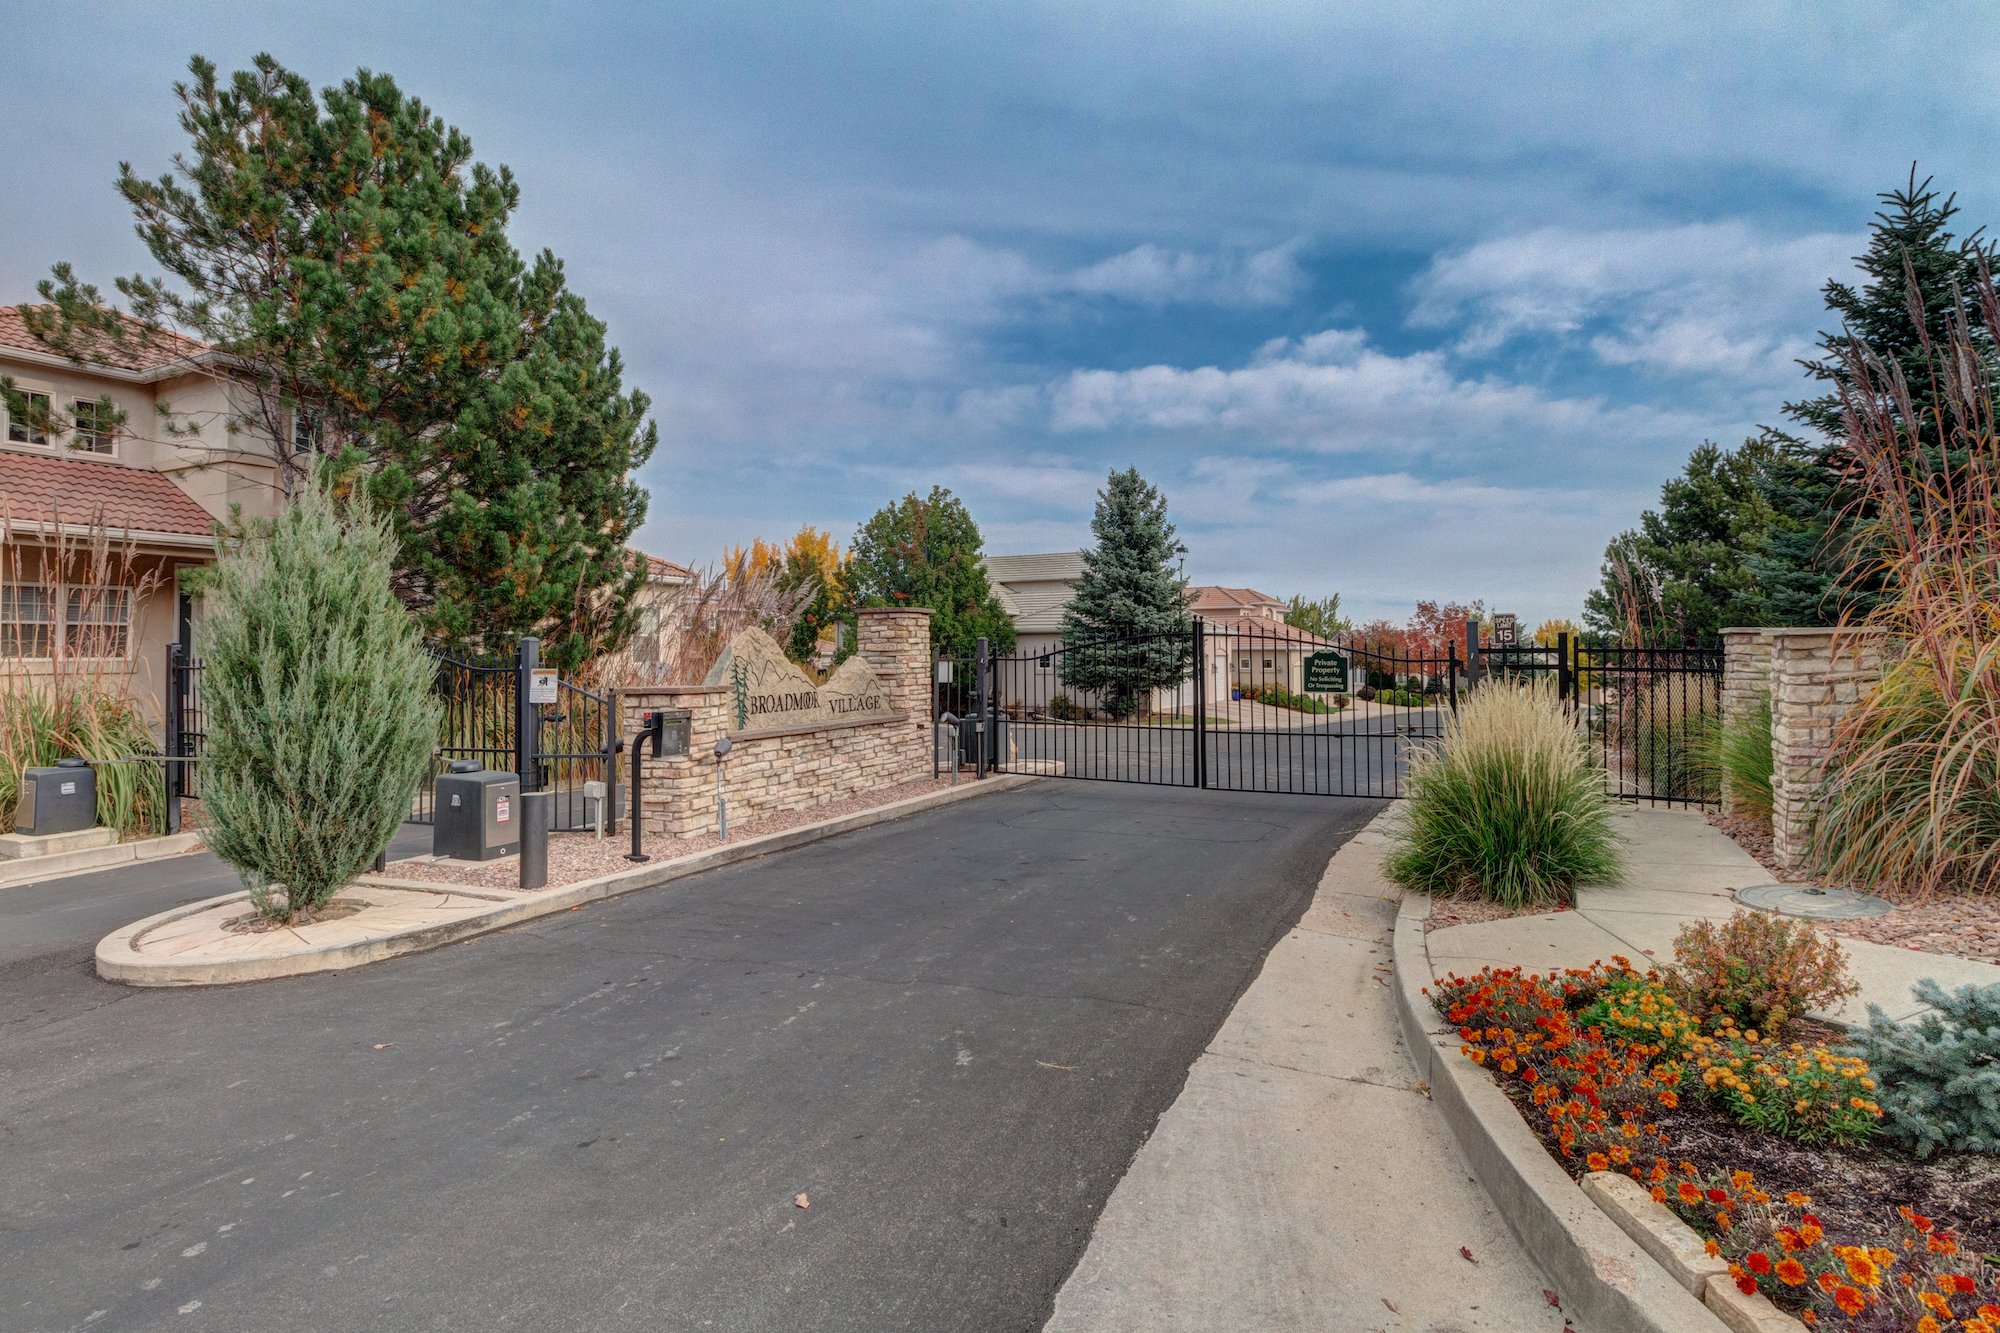 29-Gated Entrance Into the Community.jpg